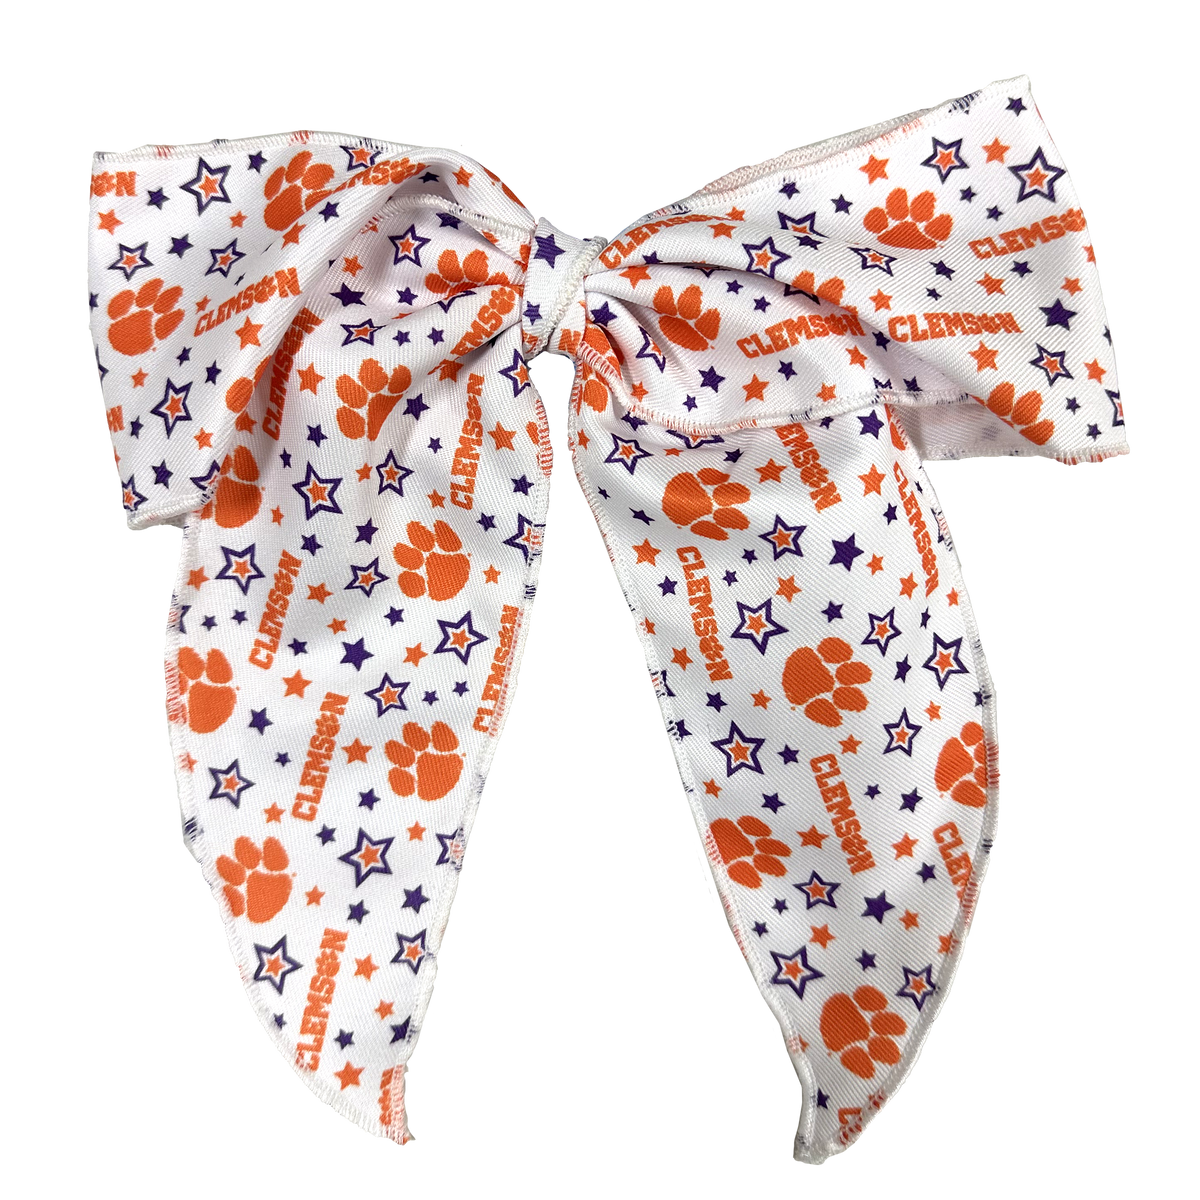 Clemson College Star Print Fabric Bowtie with Knot and Tails - Medium